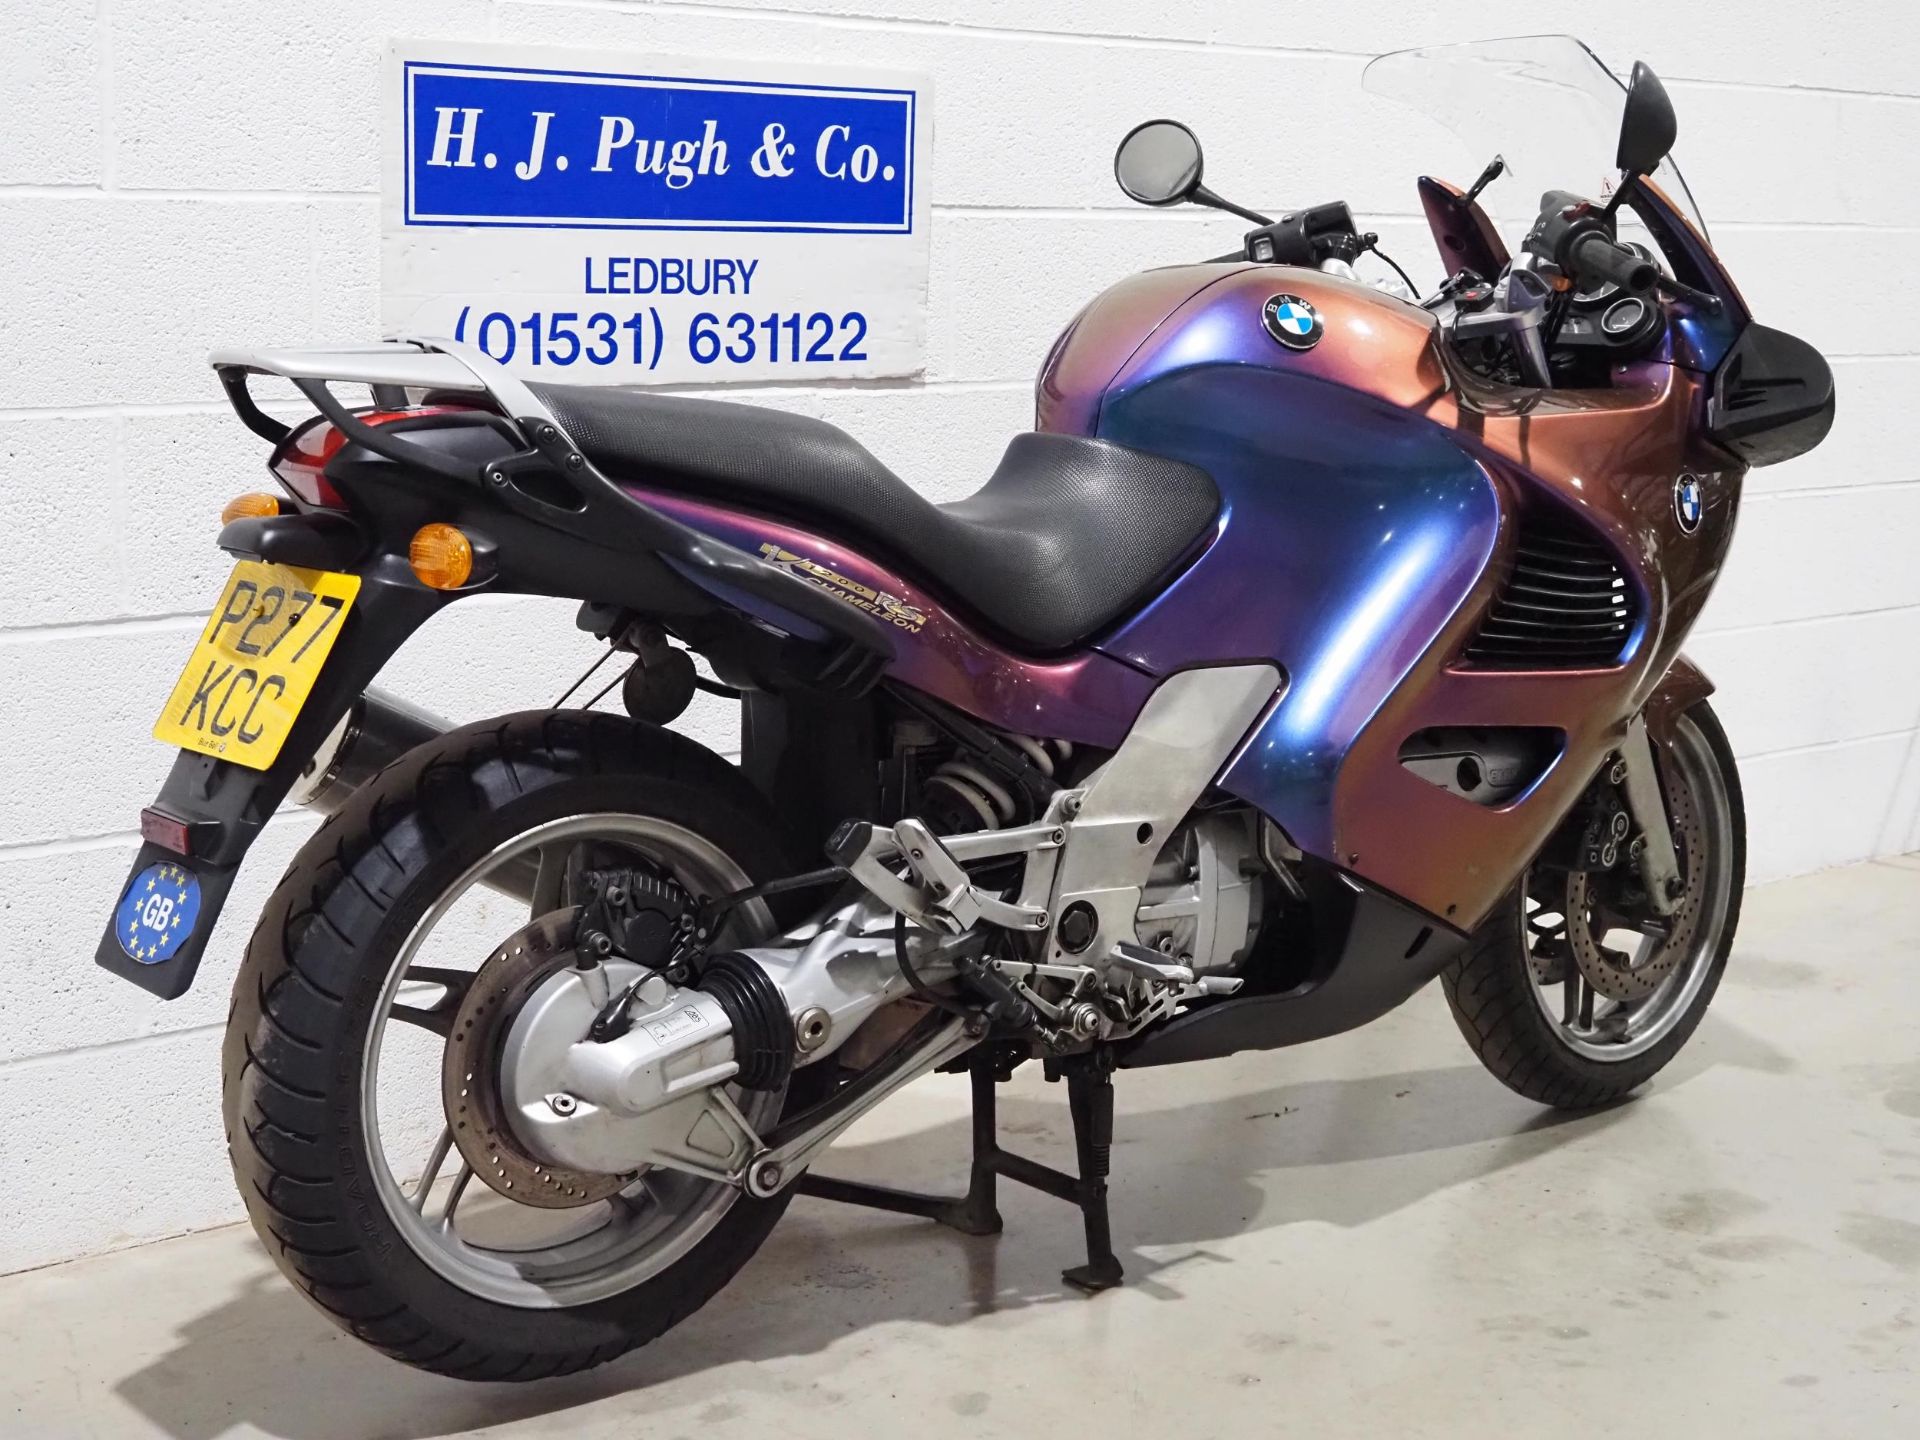 BMW K1200 RS motorcycle. 1997. 1171cc. Runs and rides, MOT until 18.03.25. Comes with heated - Image 3 of 6